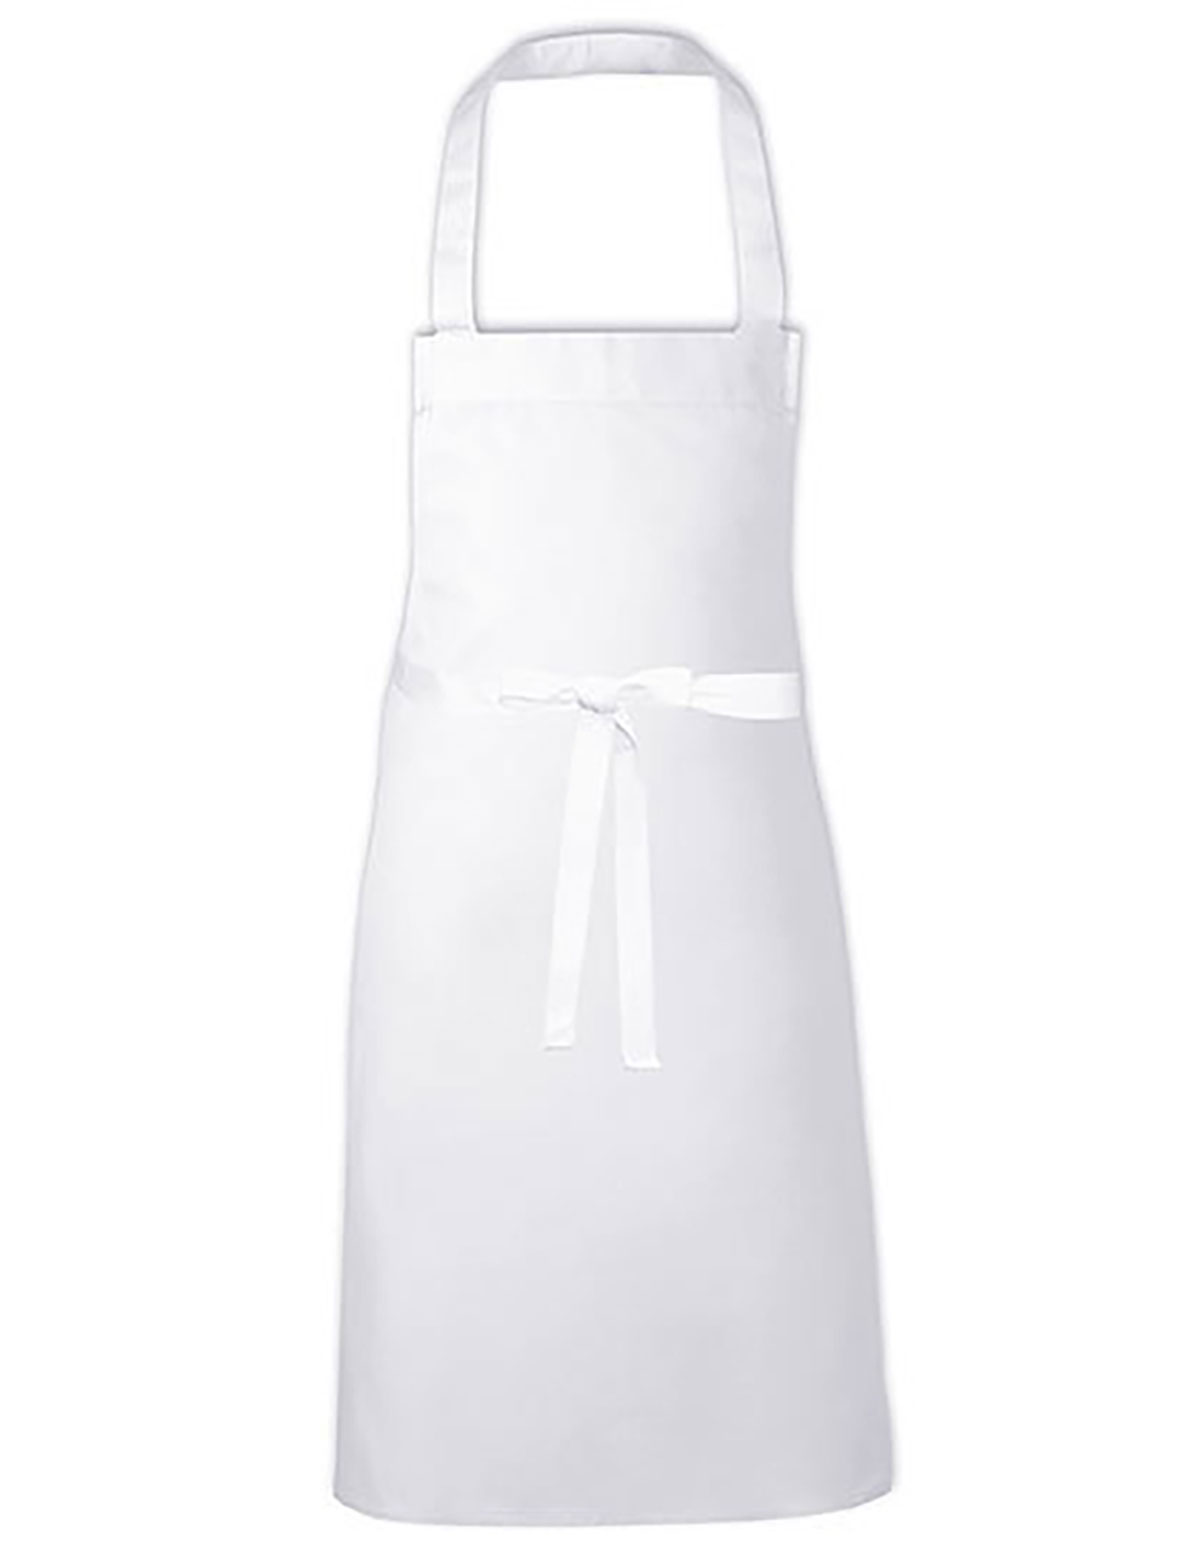 Barbecue Apron Sublimation X972